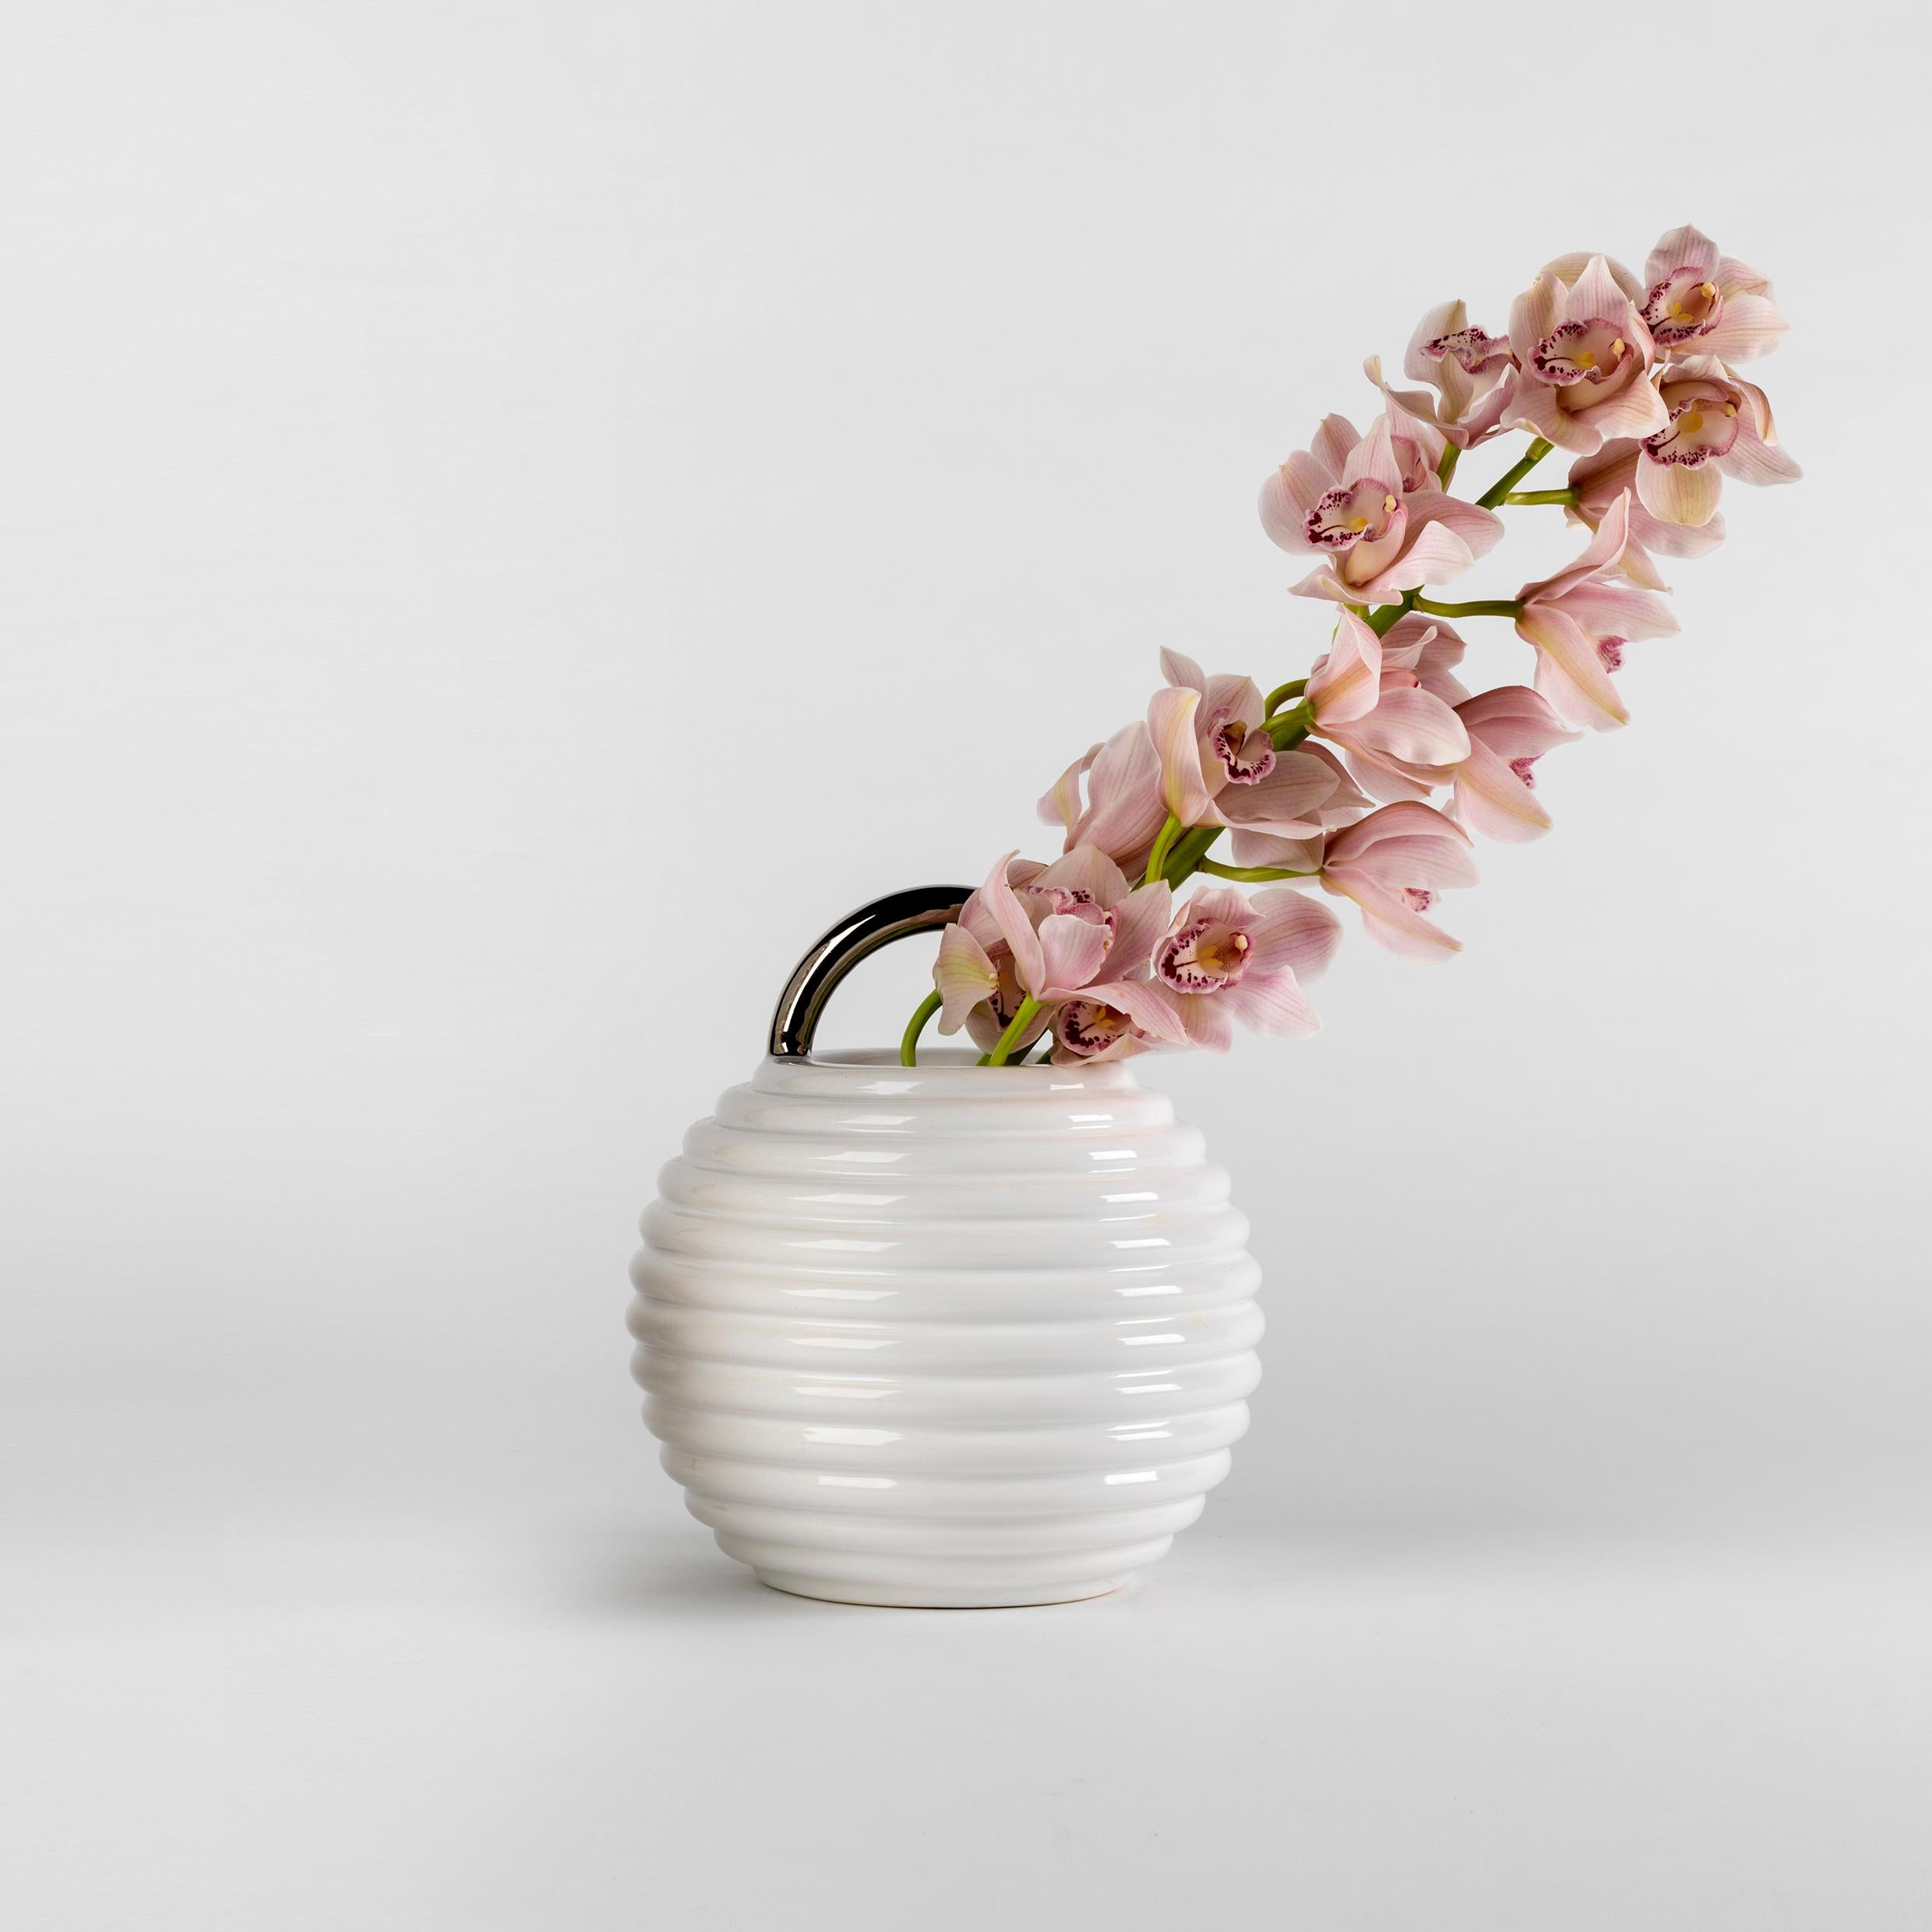 White enamelled ceramic vases with hand-painted decorations in gold.

Single: Ø27 x H.30 cm 

The Grasso vases come in different finishes. The basic versions are either all in white or black with the handle painted in gold. There are also hand